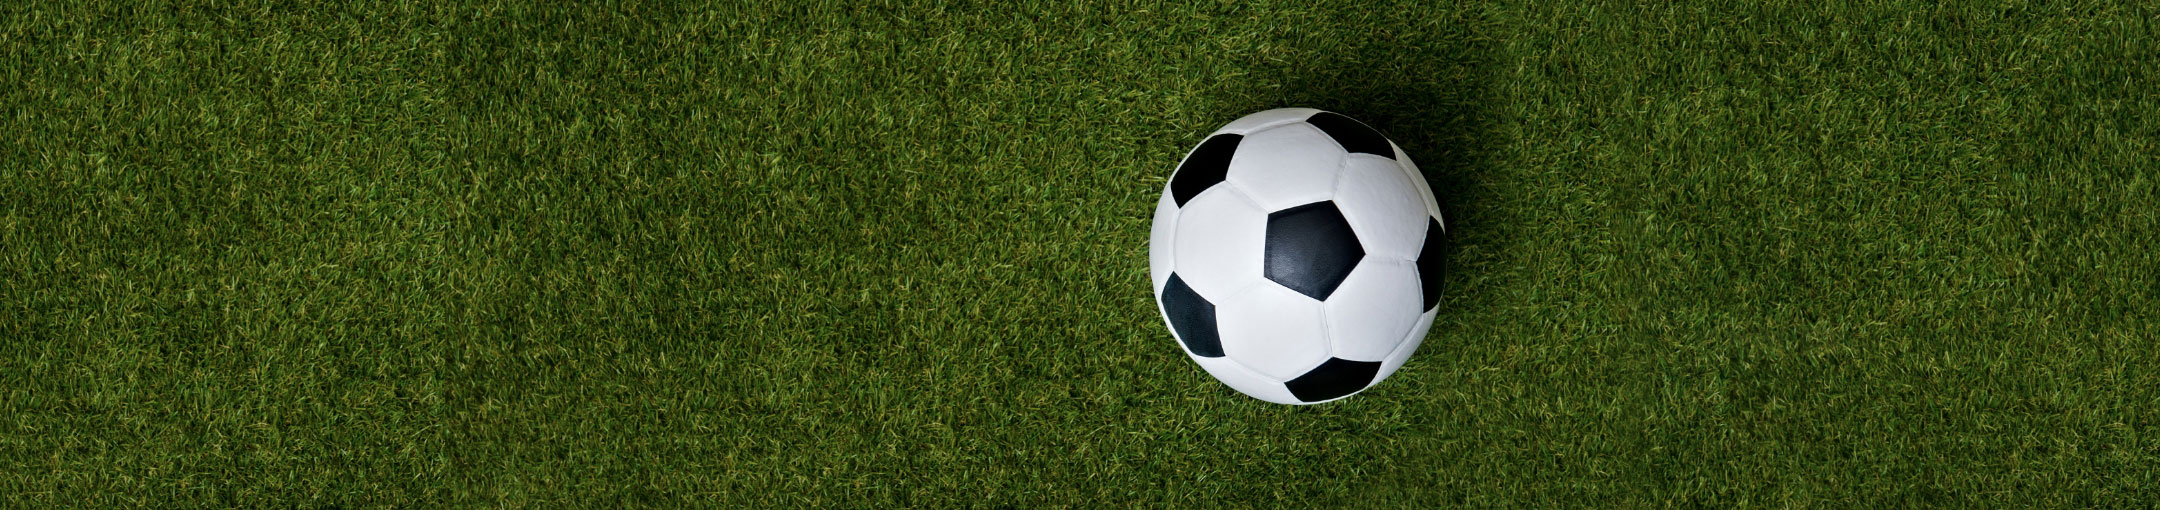 a soccer ball sitting on a field